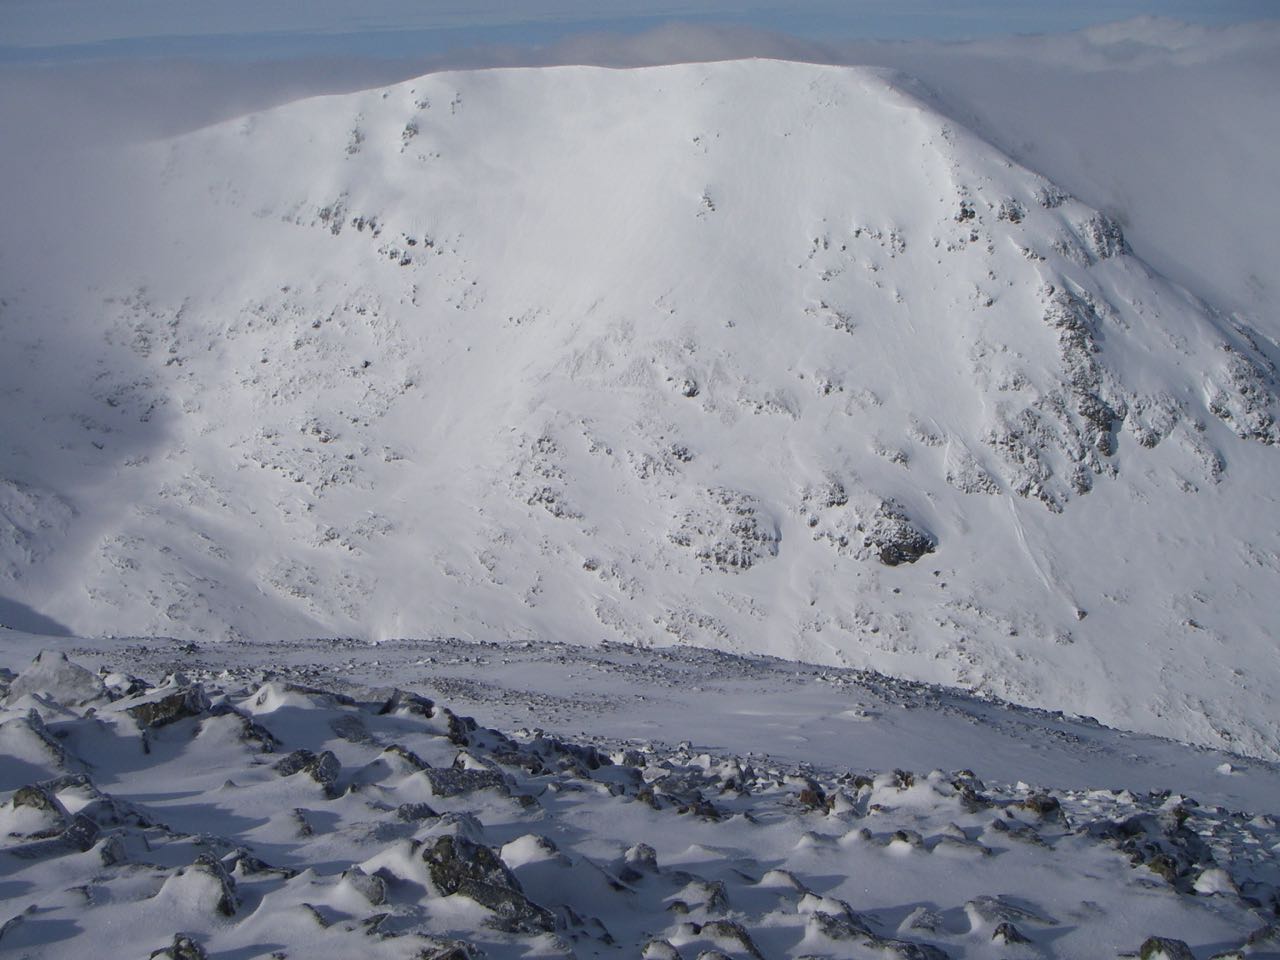 Looking West from Meall a Bhuiridh contrasting its scoured West flank (near ground) with the loaded East face of Creise